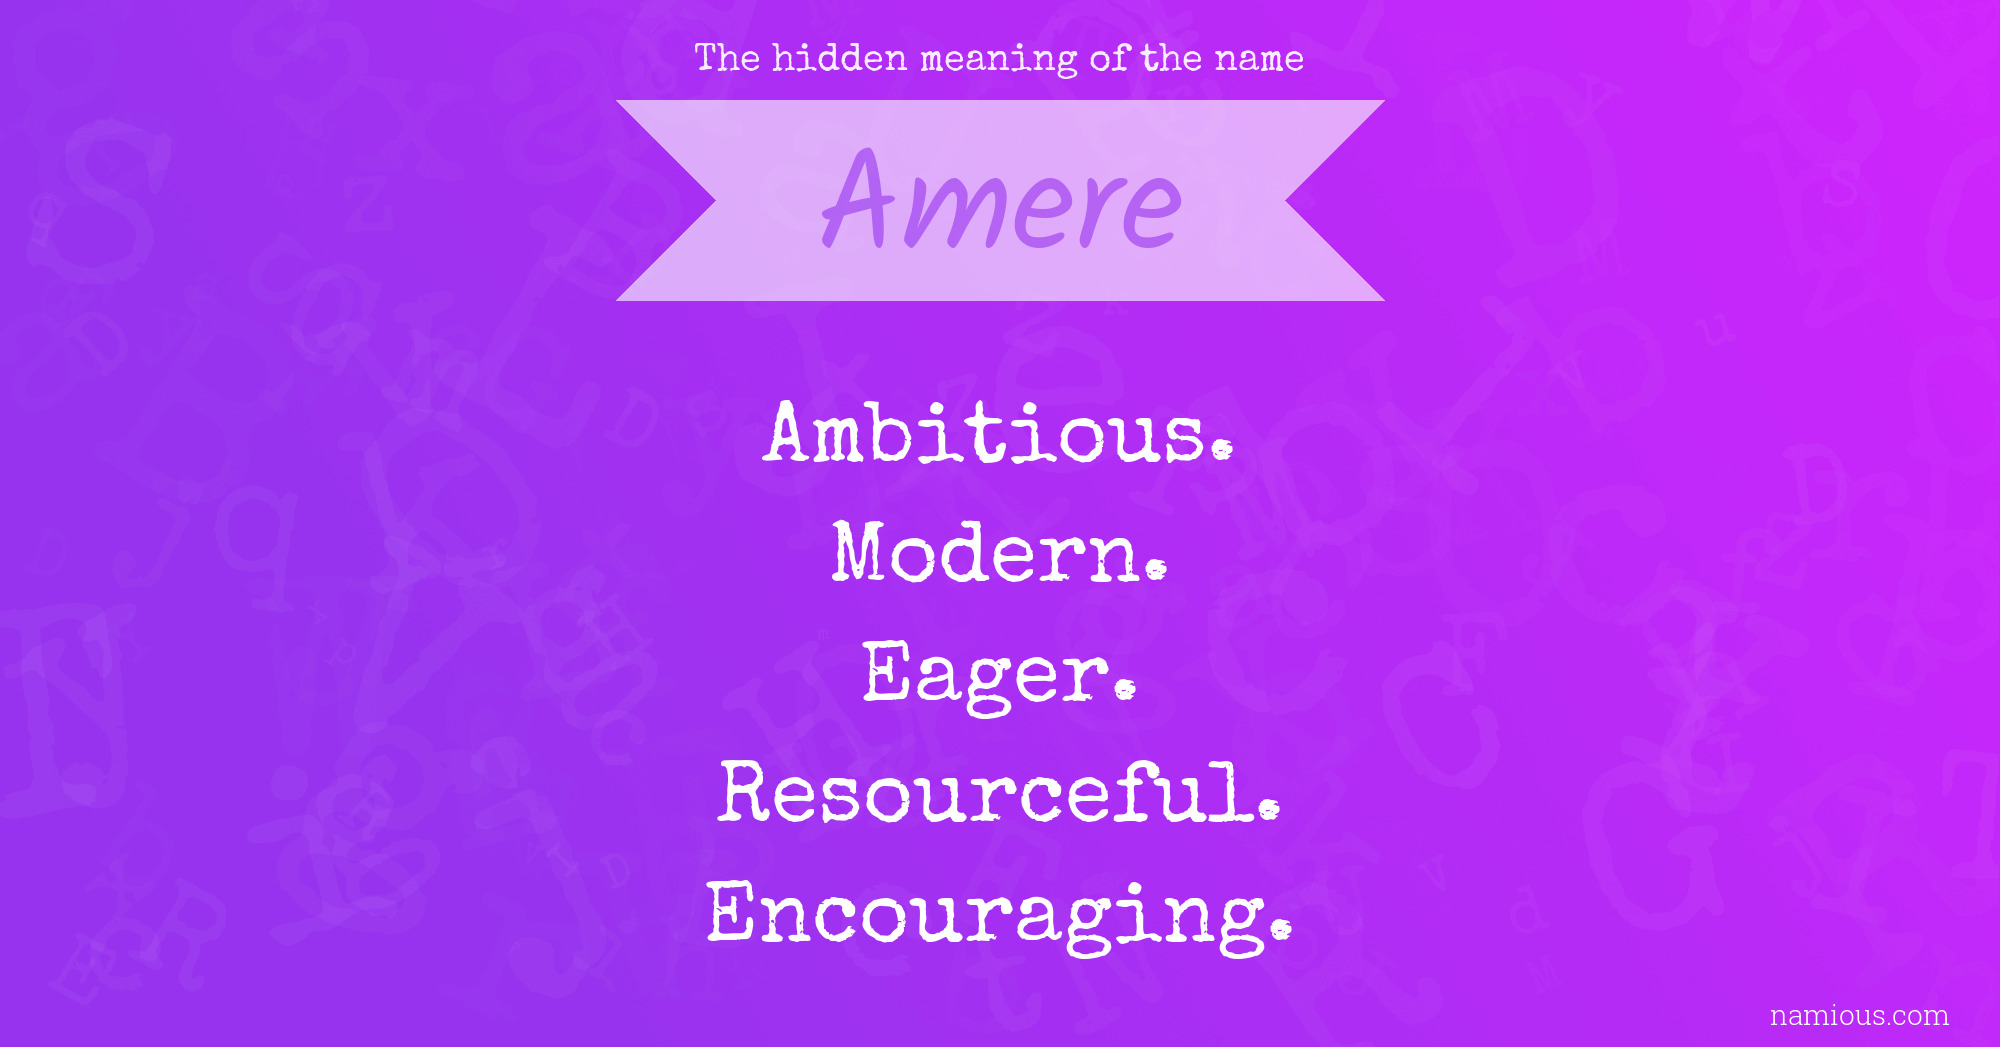 The hidden meaning of the name Amere